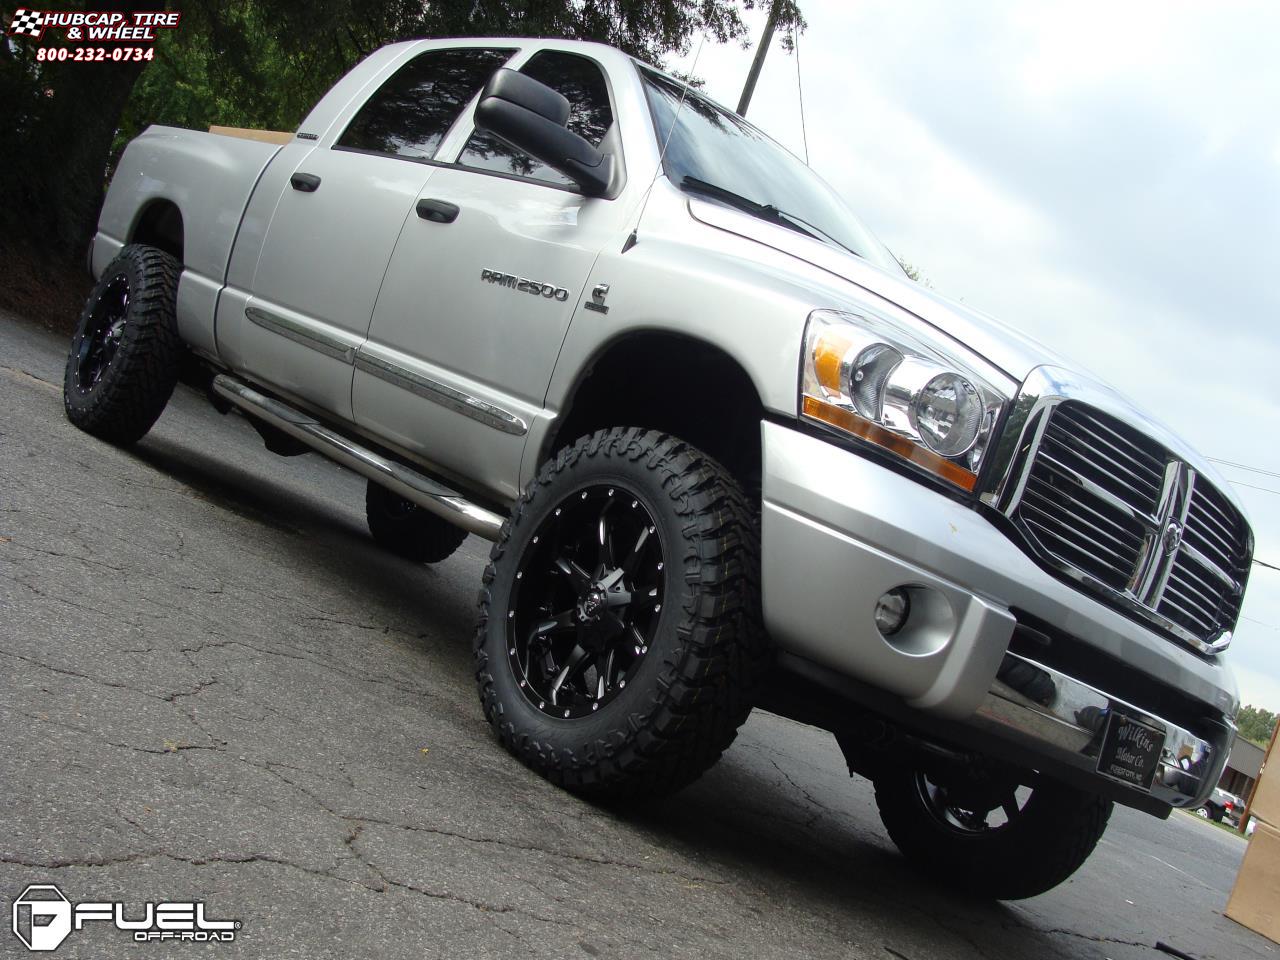 vehicle gallery/dodge ram 2500 fuel nutz d251 20X10  Matte Black & Milled wheels and rims